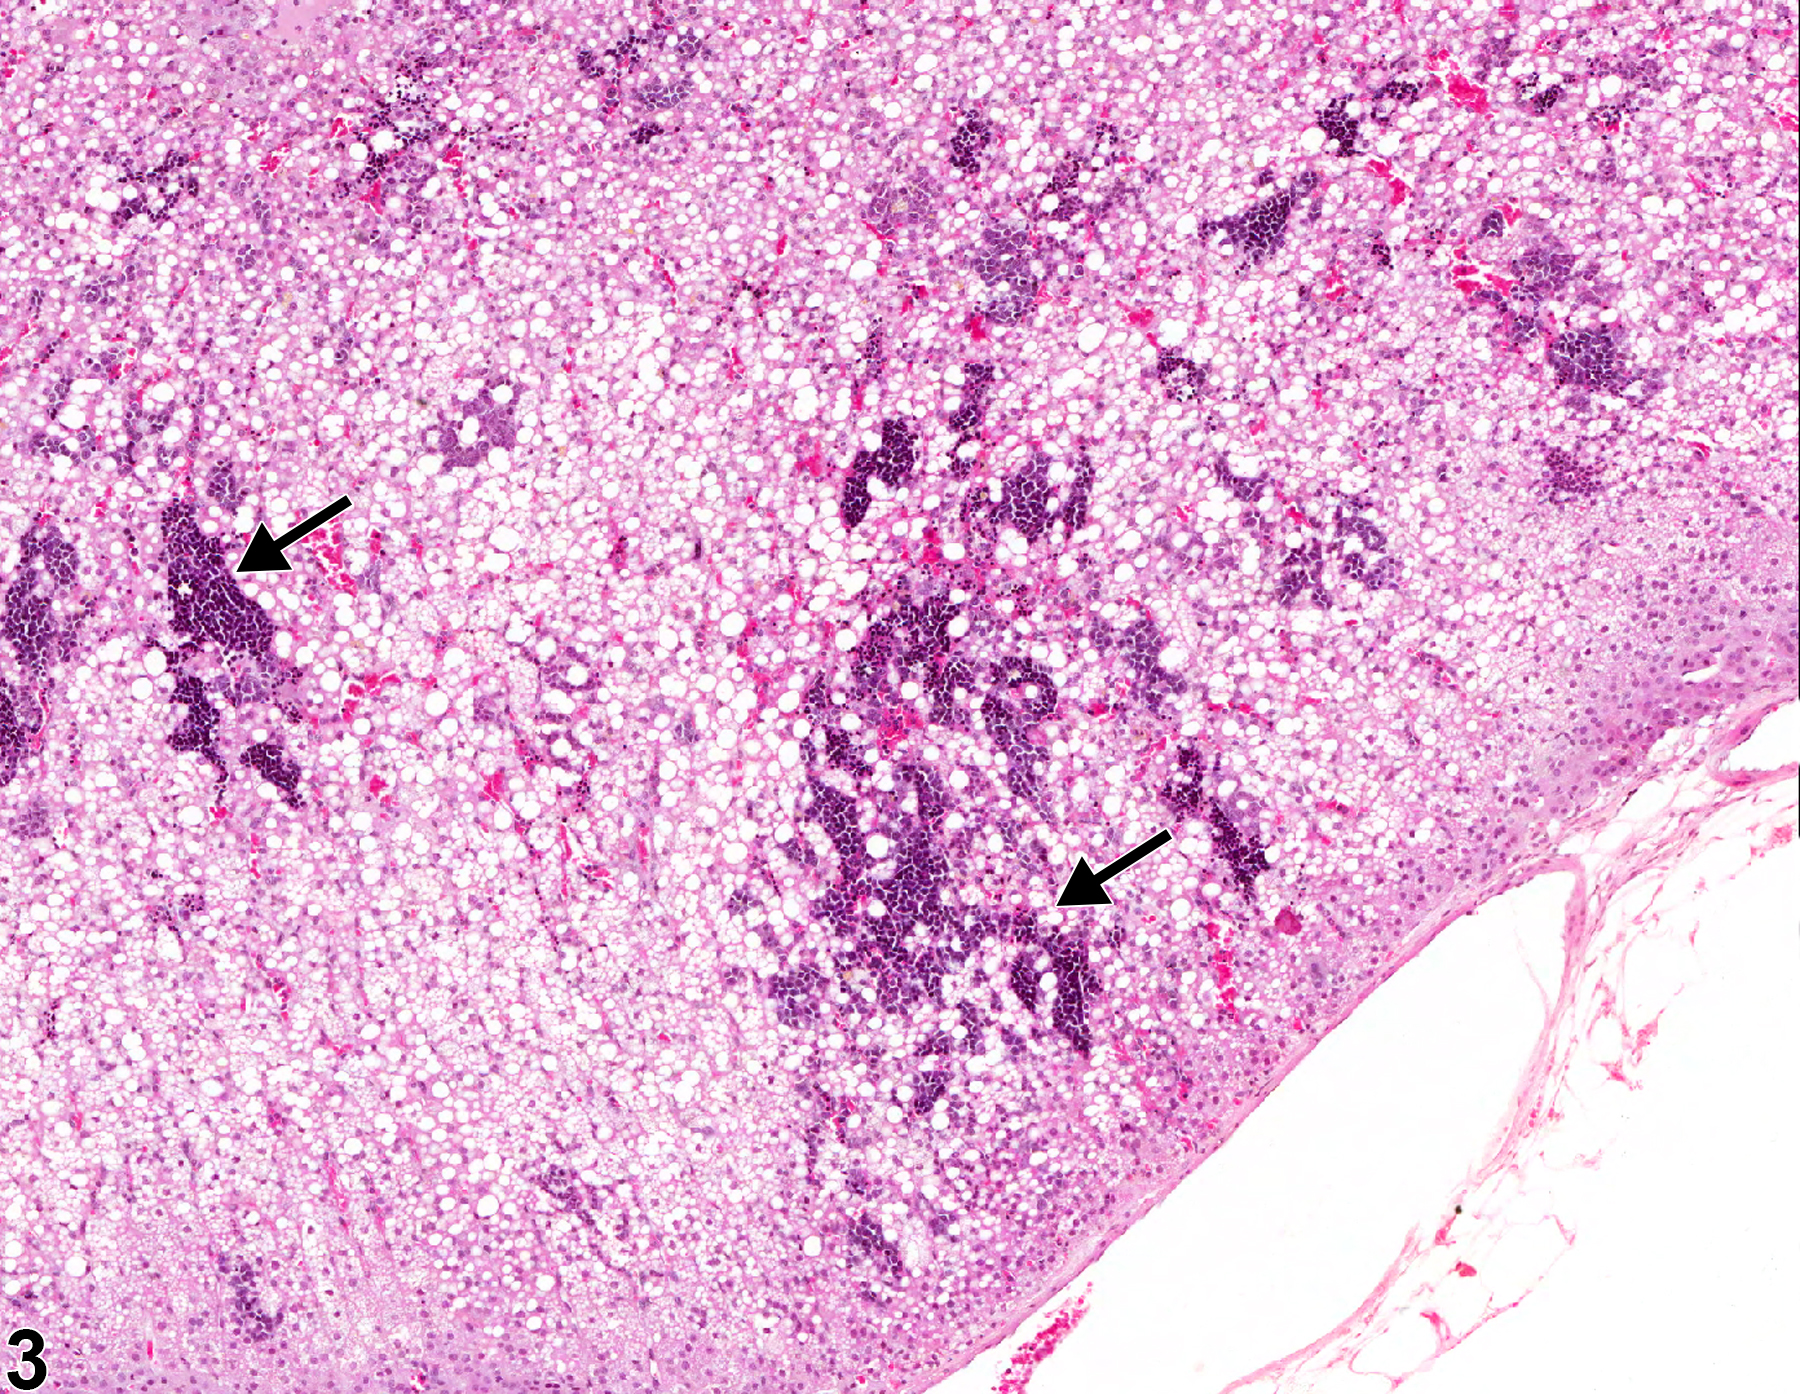 Image of extramedullary hematopoiesis in the adrenal gland from a male F344/N rat in a chronic study